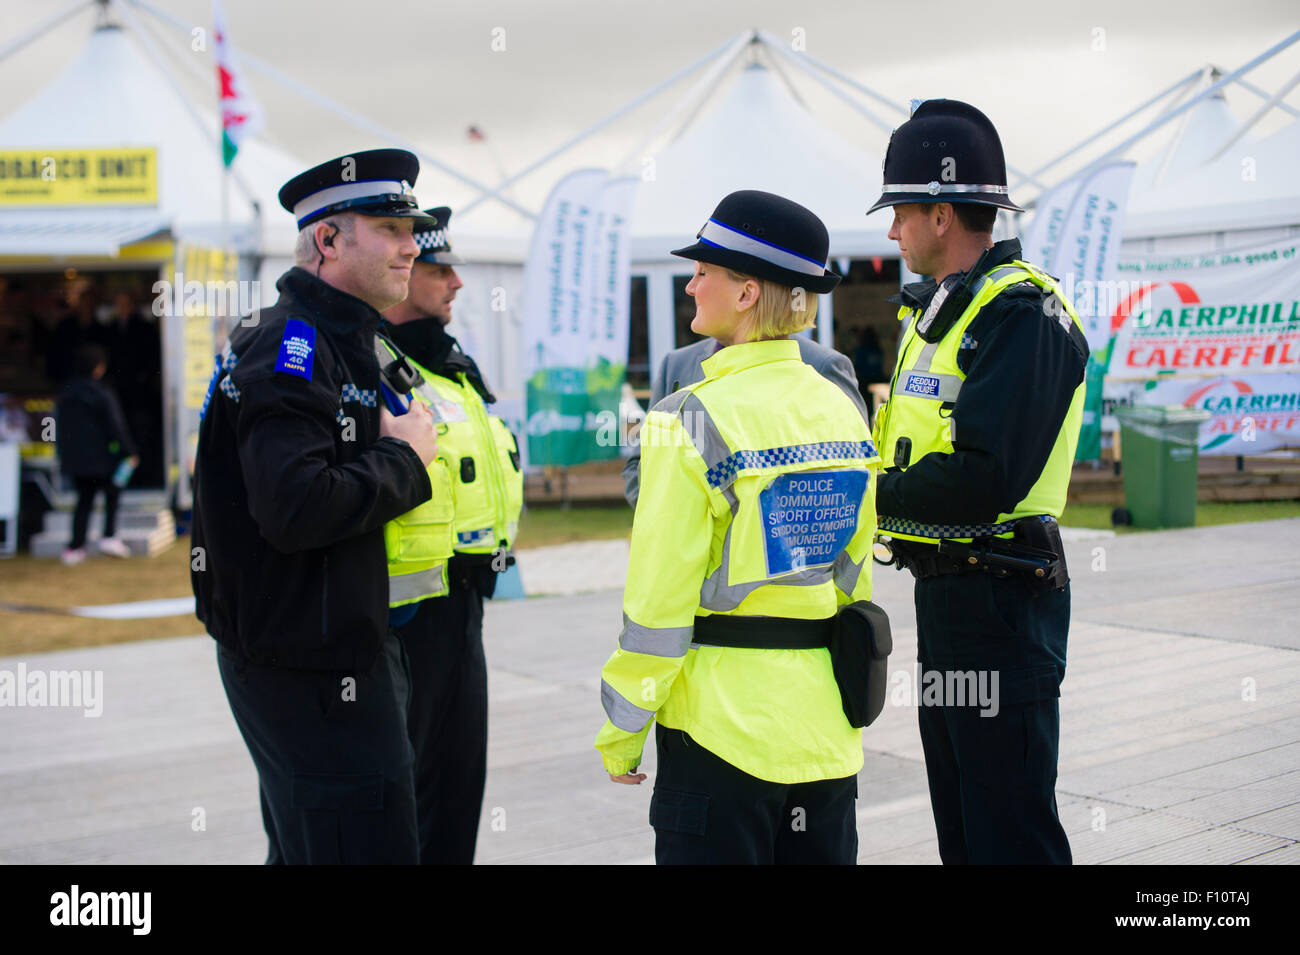 Vier Polizisten South Wales und CSO (Community Support Officers), Wales UK Stockfoto